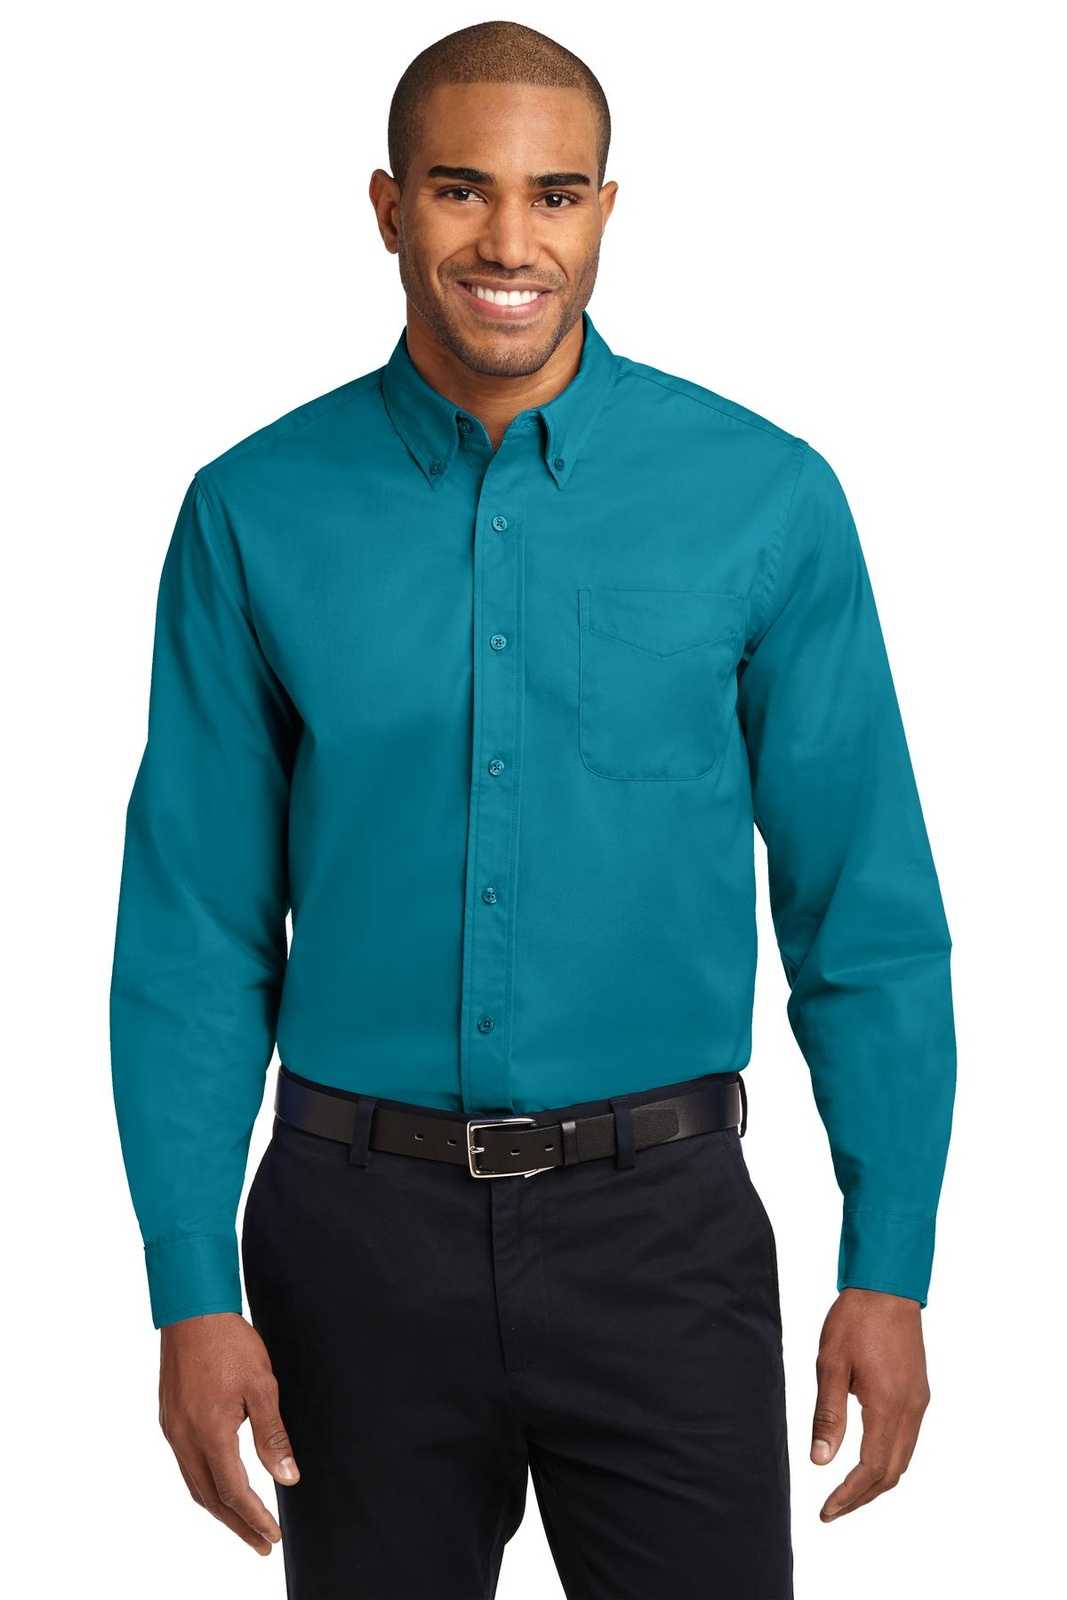 Port Authority S608 Long Sleeve Easy Care Shirt - Teal Green - HIT a Double - 1